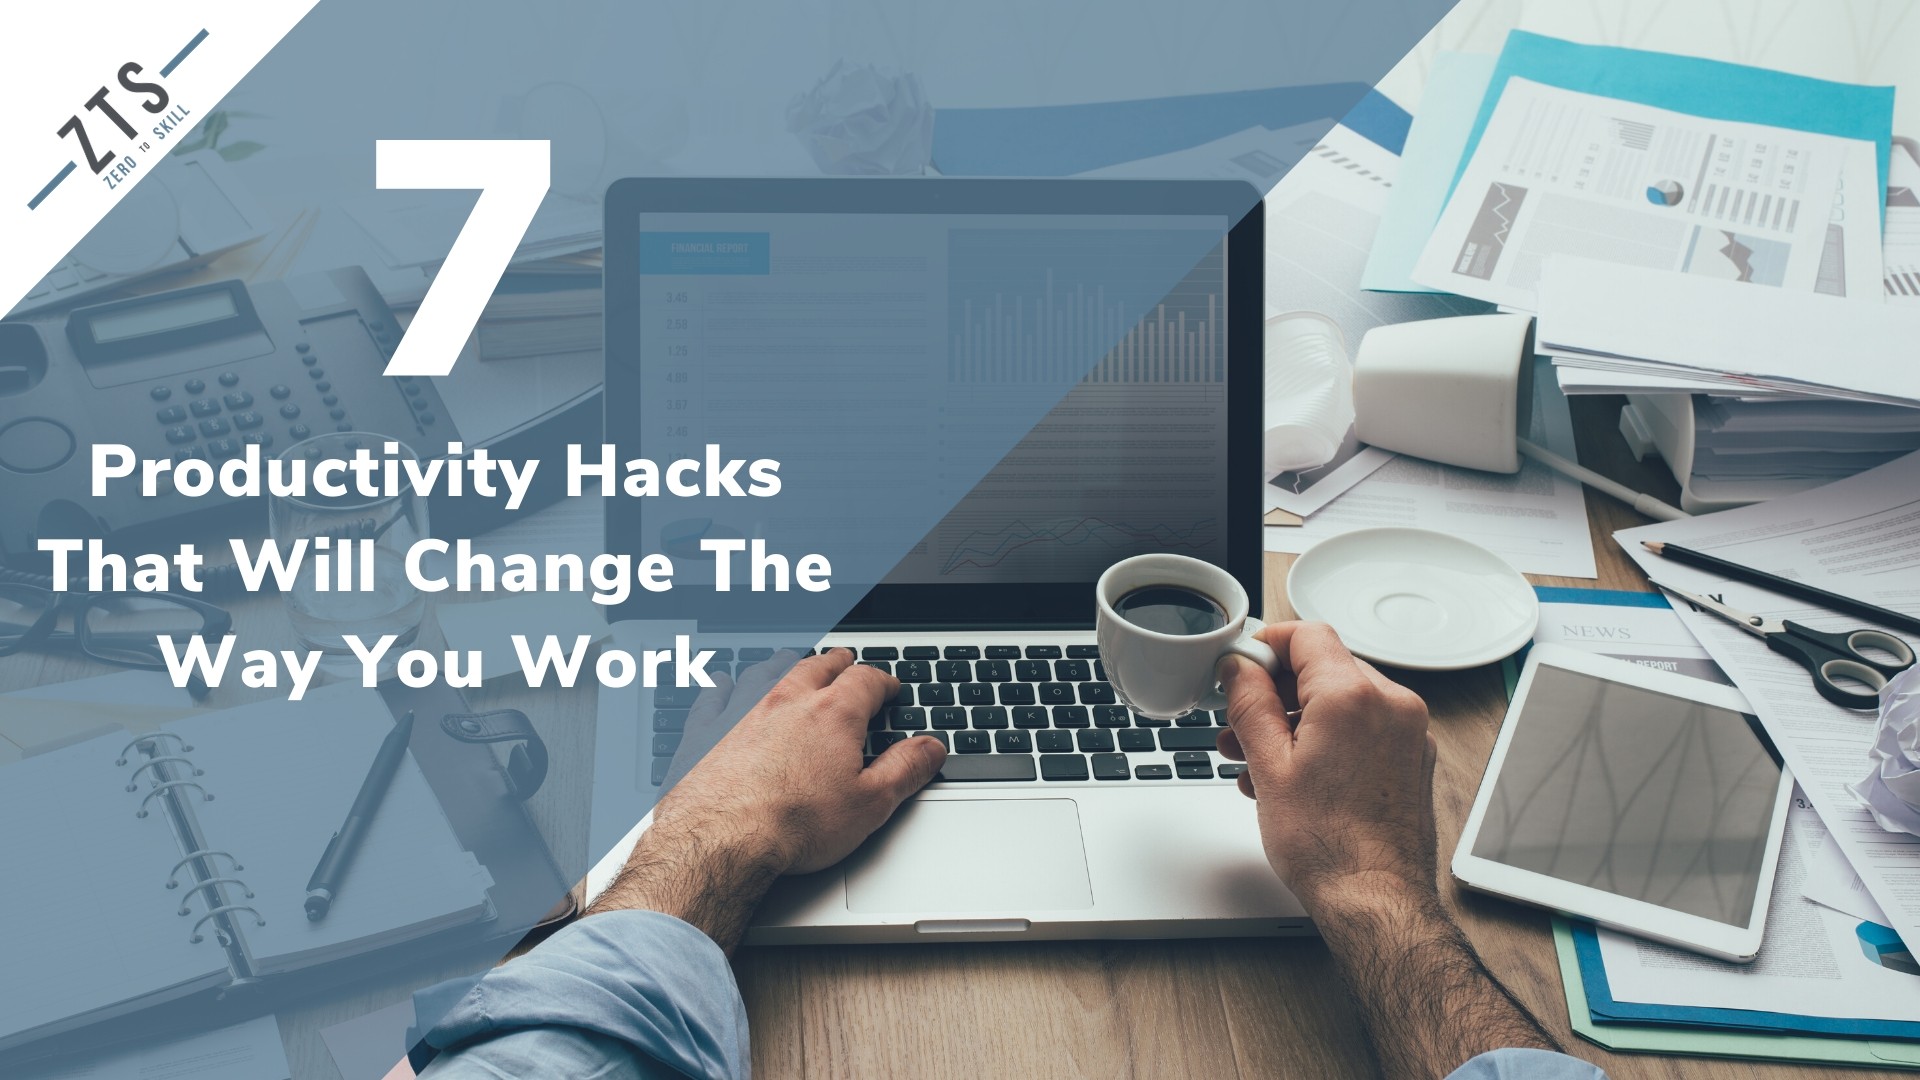 7 Productivity Hacks That Will Change The Way You Work